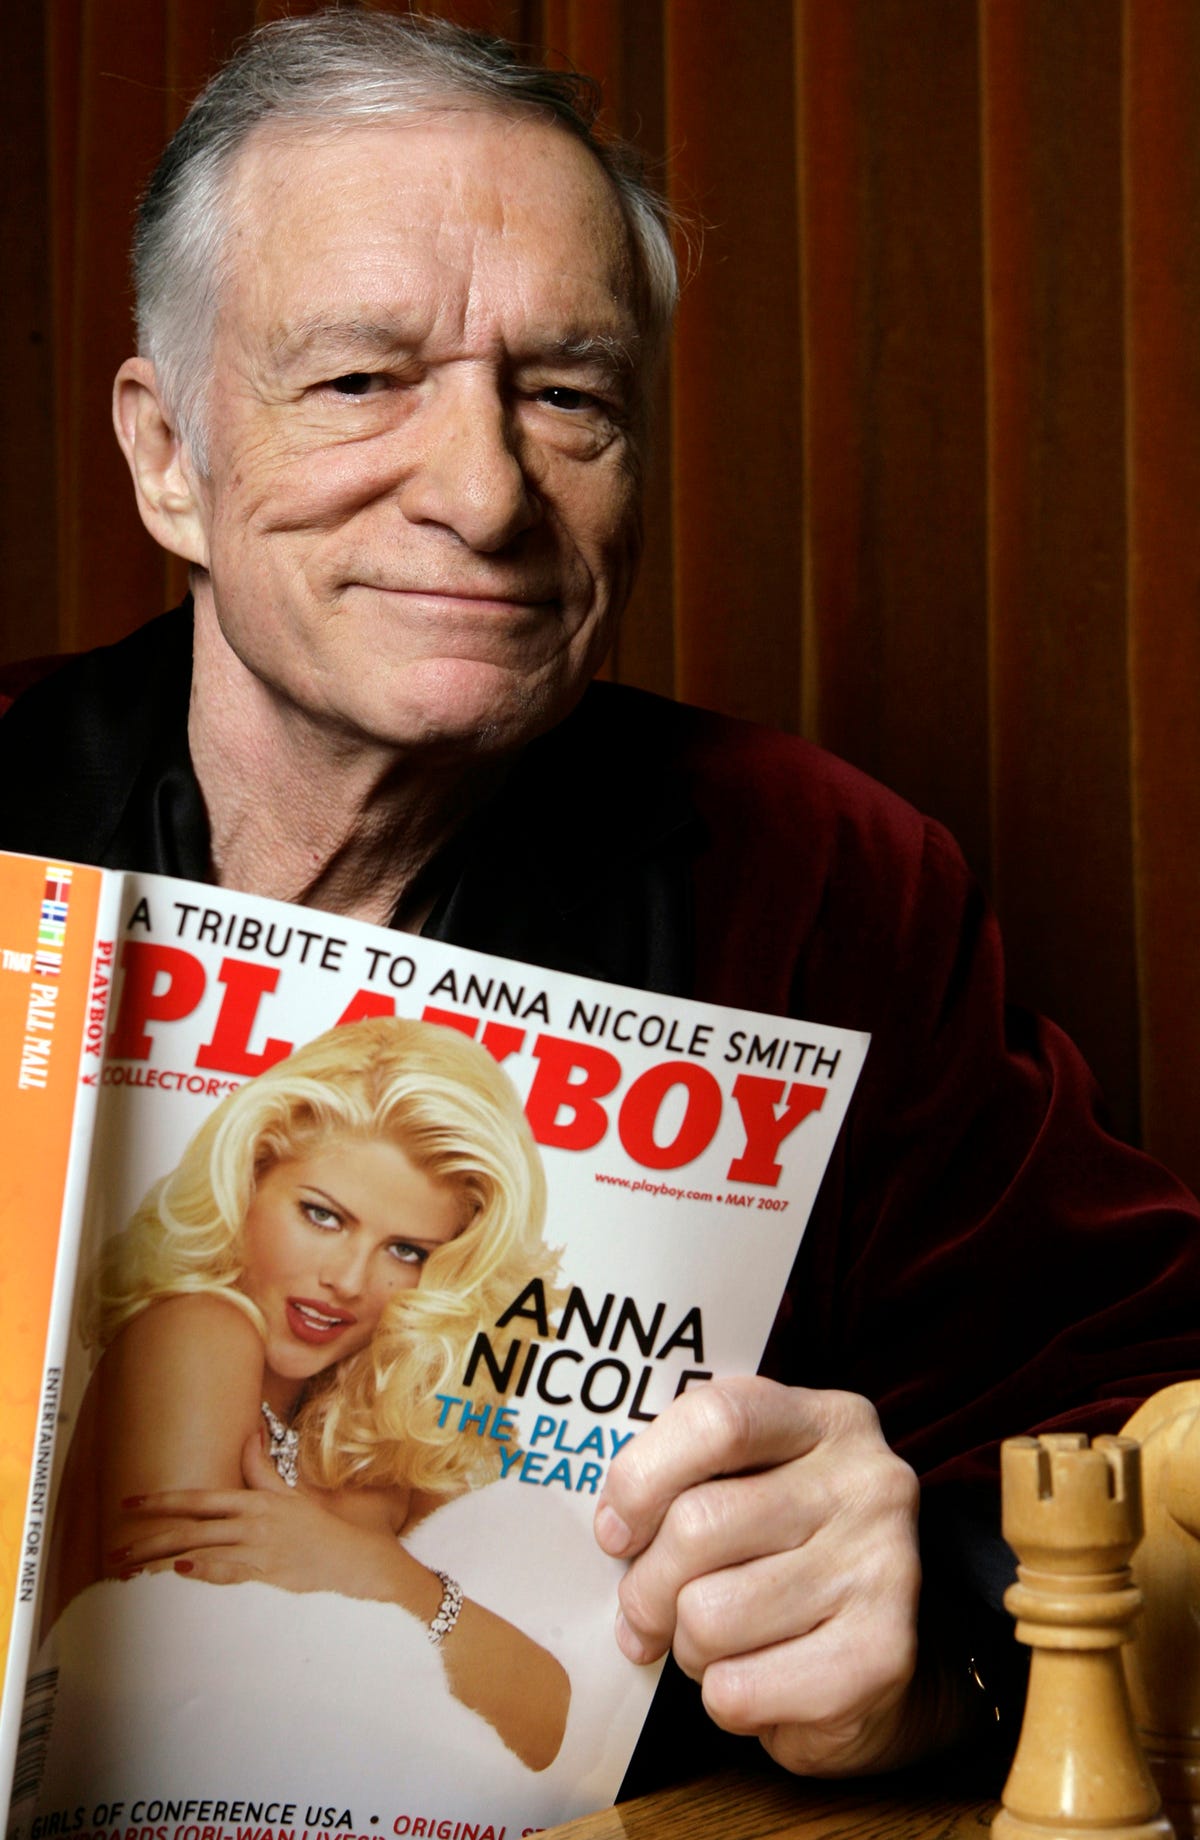 Nudist Board - Playboy, Hugh Hefner documentary: Are nude photos today any different?